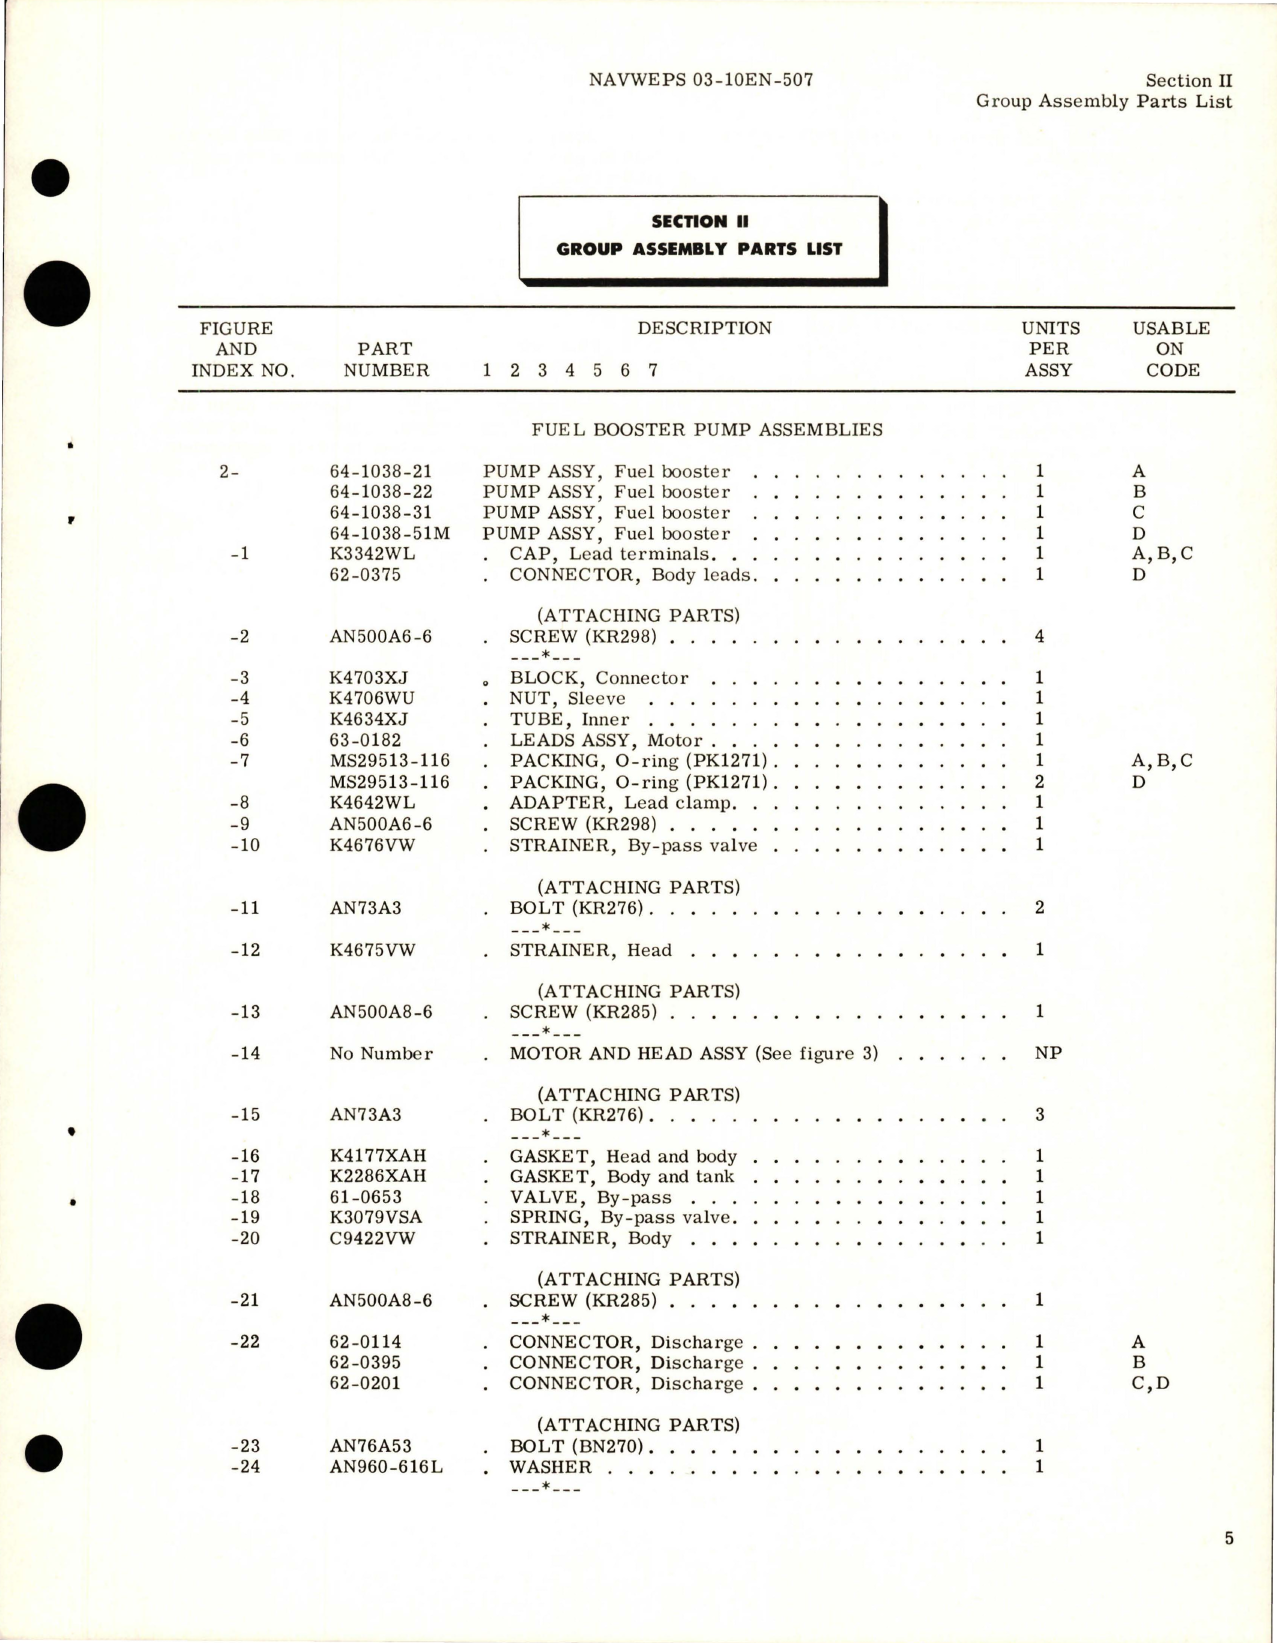 Sample page 7 from AirCorps Library document: Illustrated Parts Breakdown for Fuel Booster Pumps